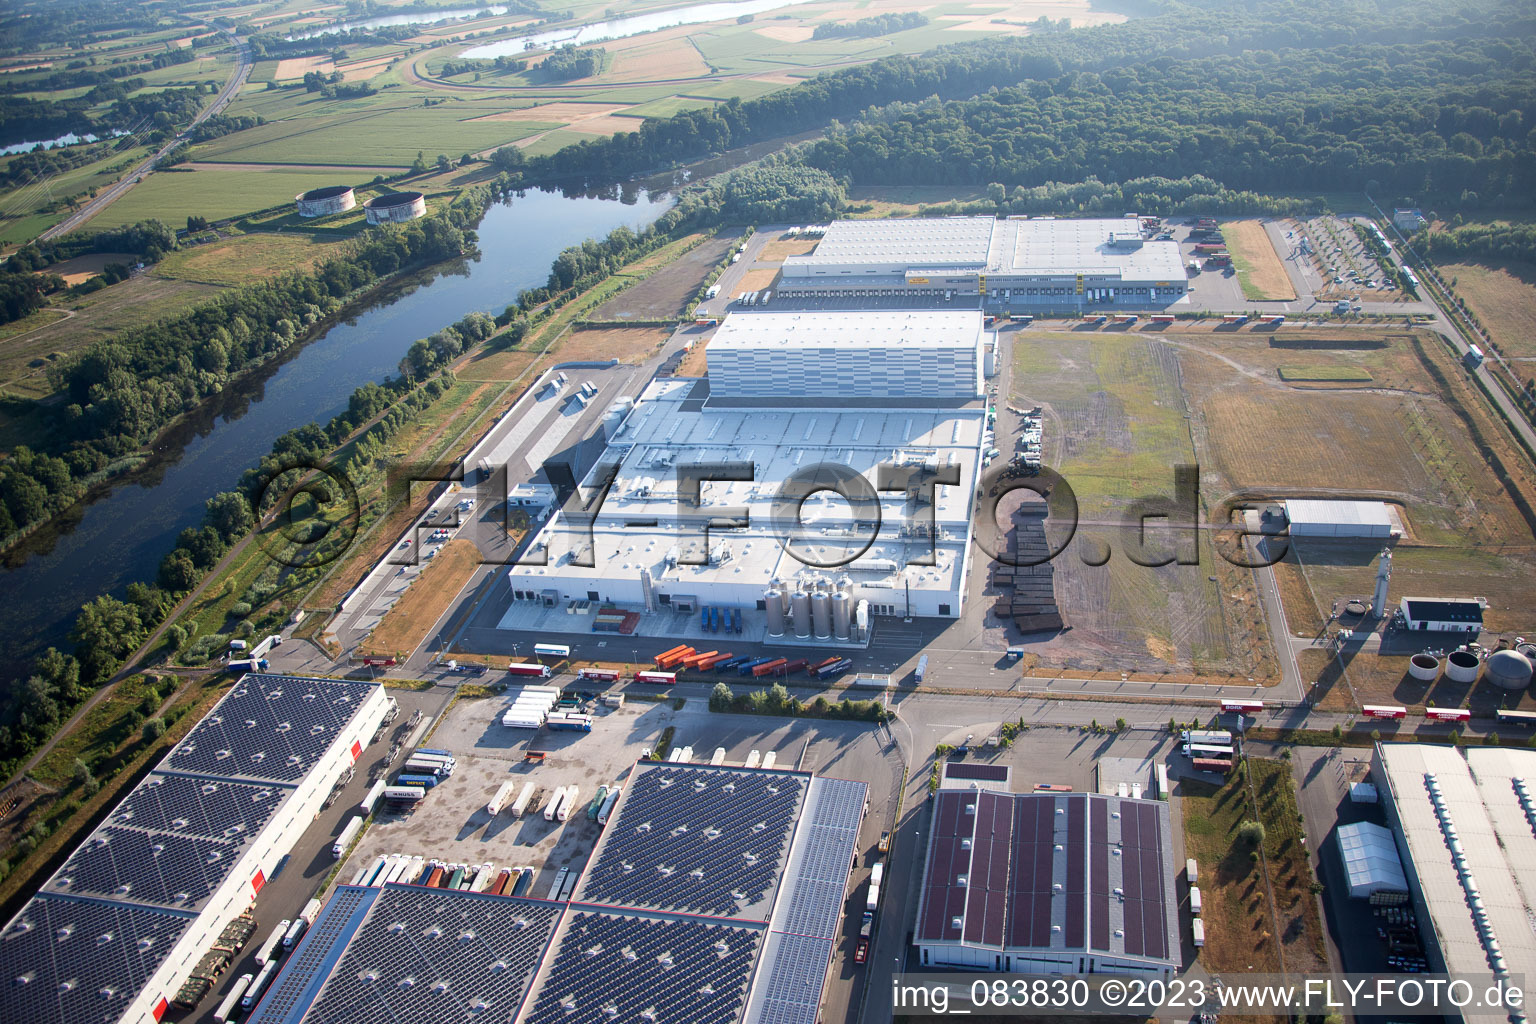 Oberwald industrial area in Wörth am Rhein in the state Rhineland-Palatinate, Germany from the drone perspective